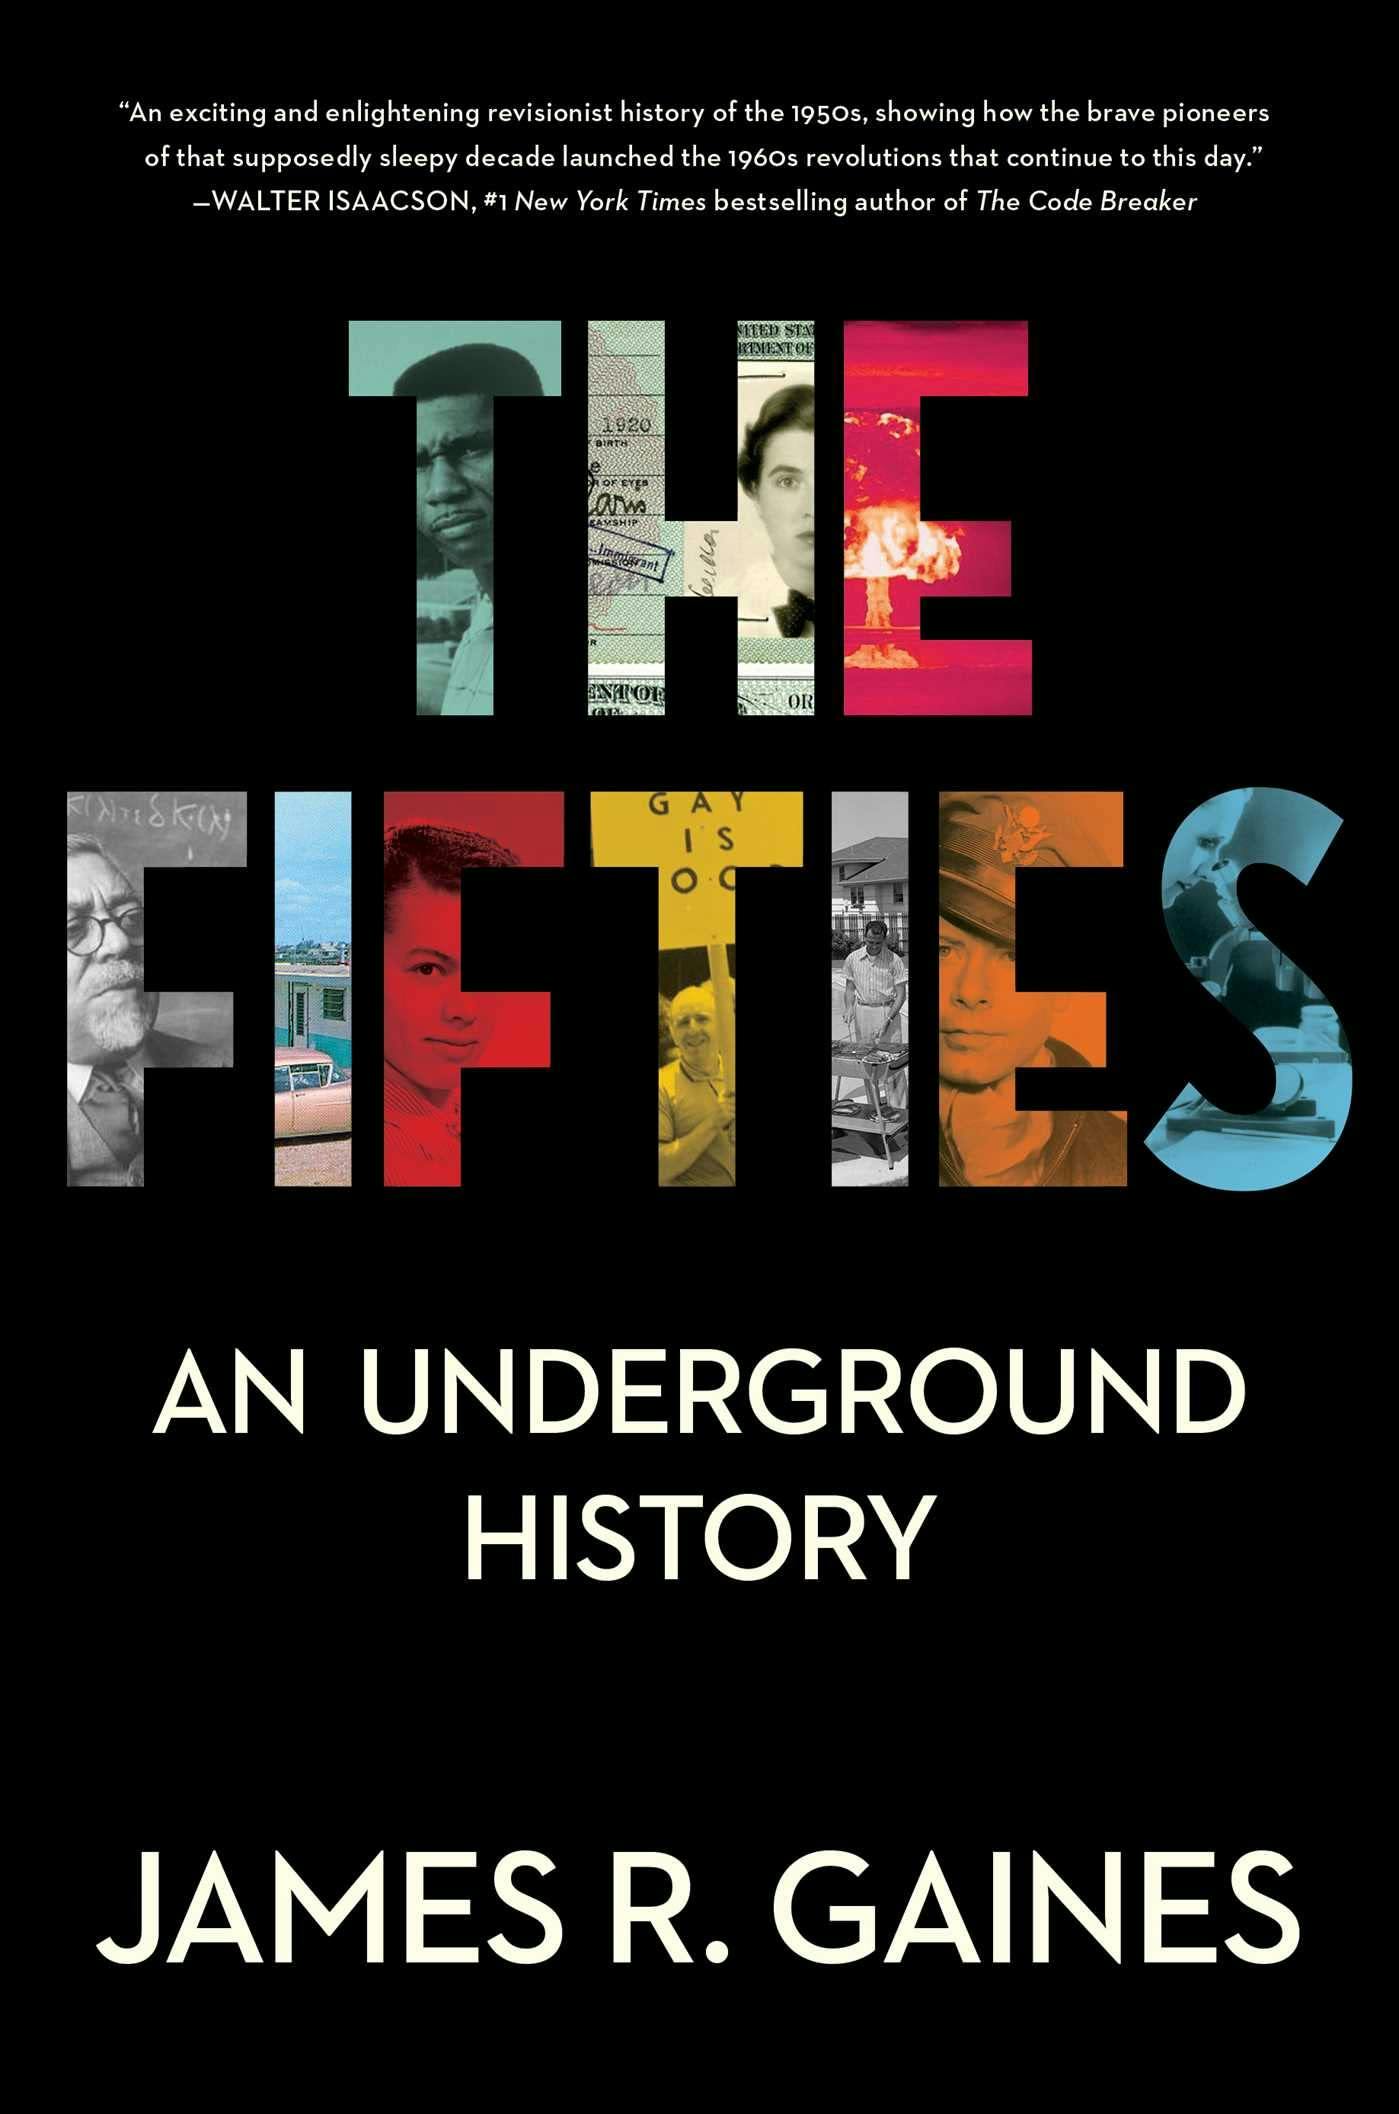 cover of The Fifties; minimalist black with the title in bold text outlining historical images